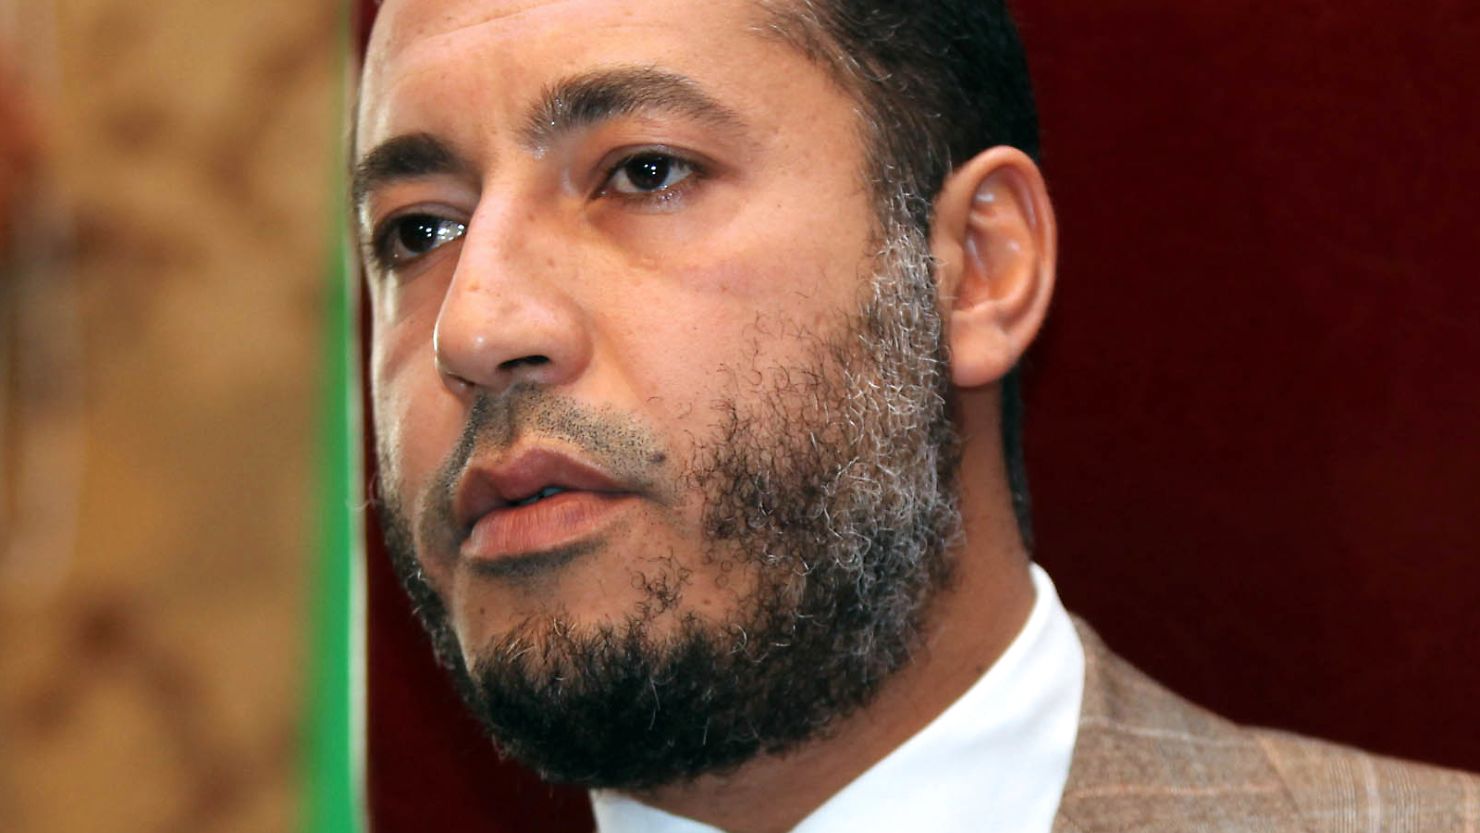 Saadi Kadhafi, pictured, fled Libya across its southern frontier to Niger in August.